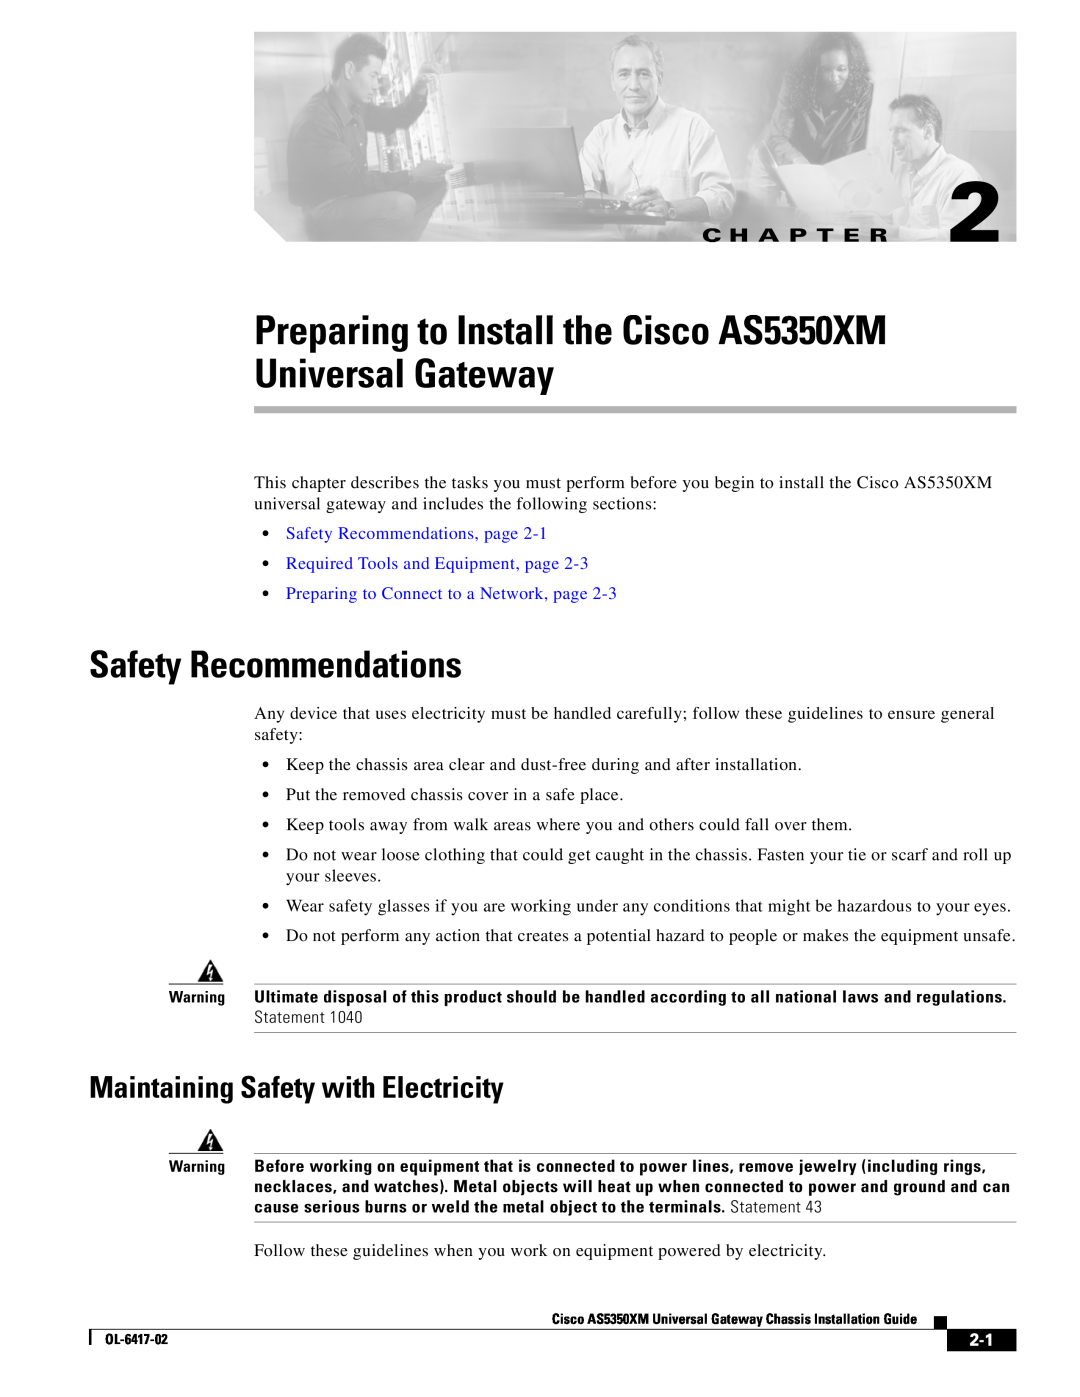 Cisco Systems manual Preparing to Install the Cisco AS5350XM Universal Gateway, Safety Recommendations, C H A P T E R 